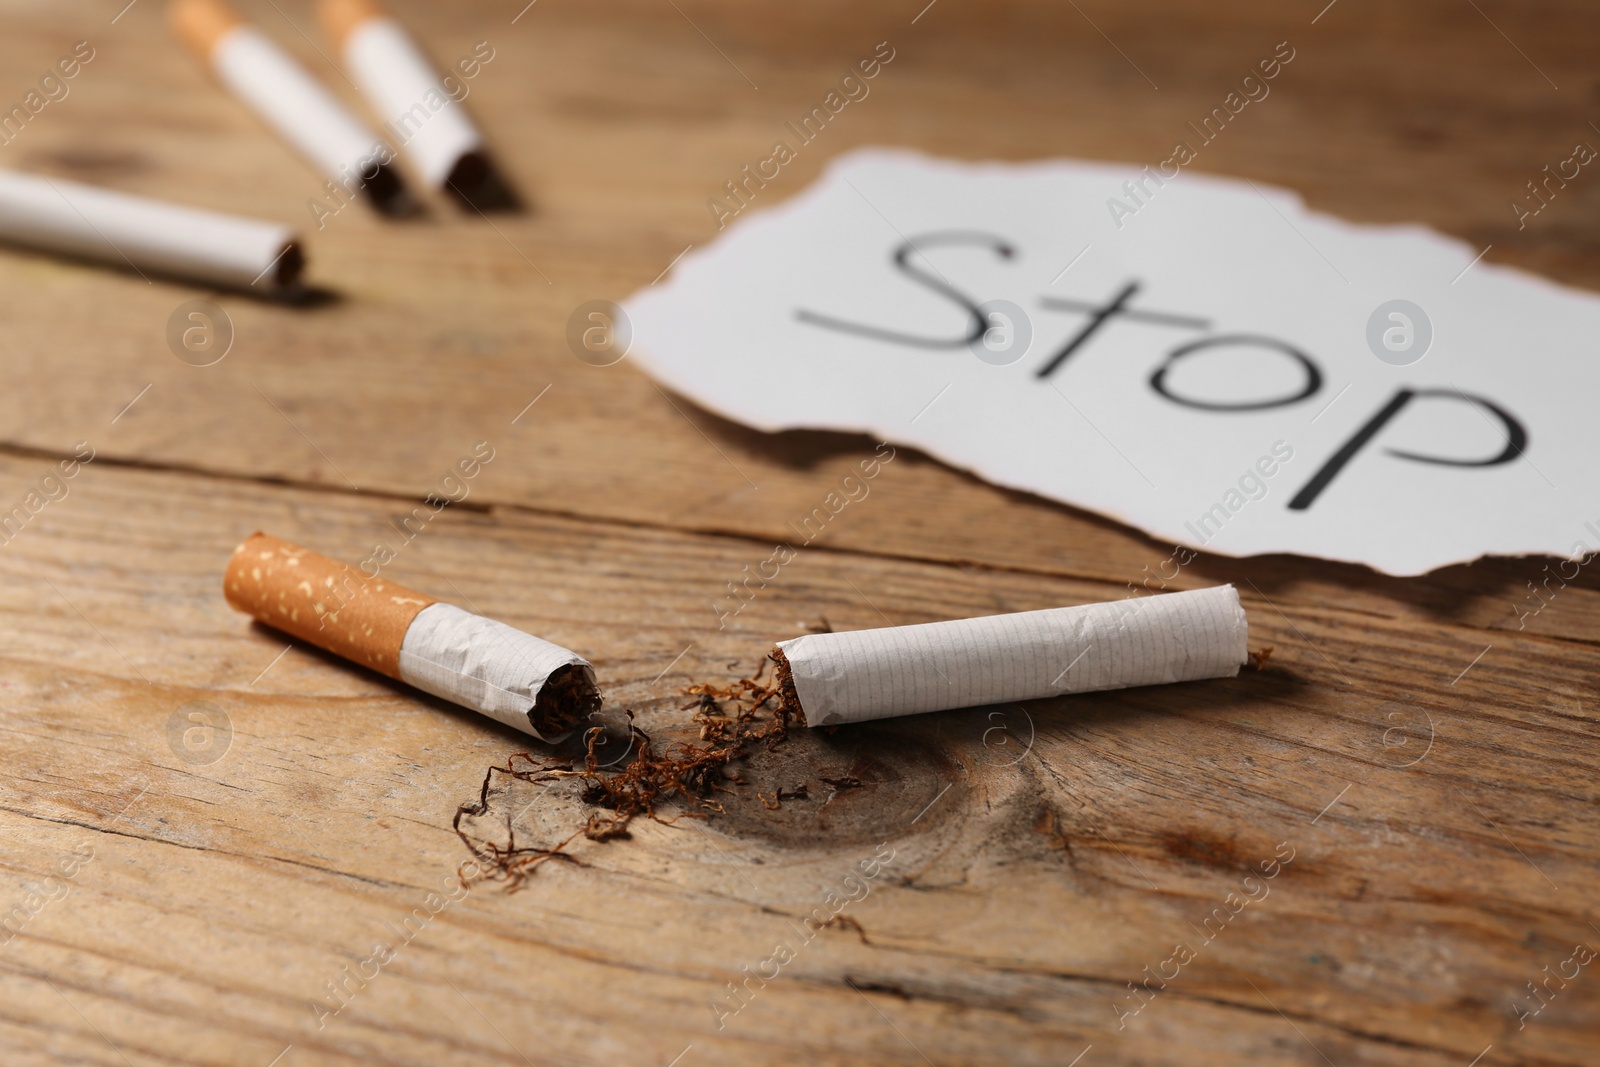 Photo of Broken cigarette and word Stop written on paper on wooden table, closeup. No smoking concept